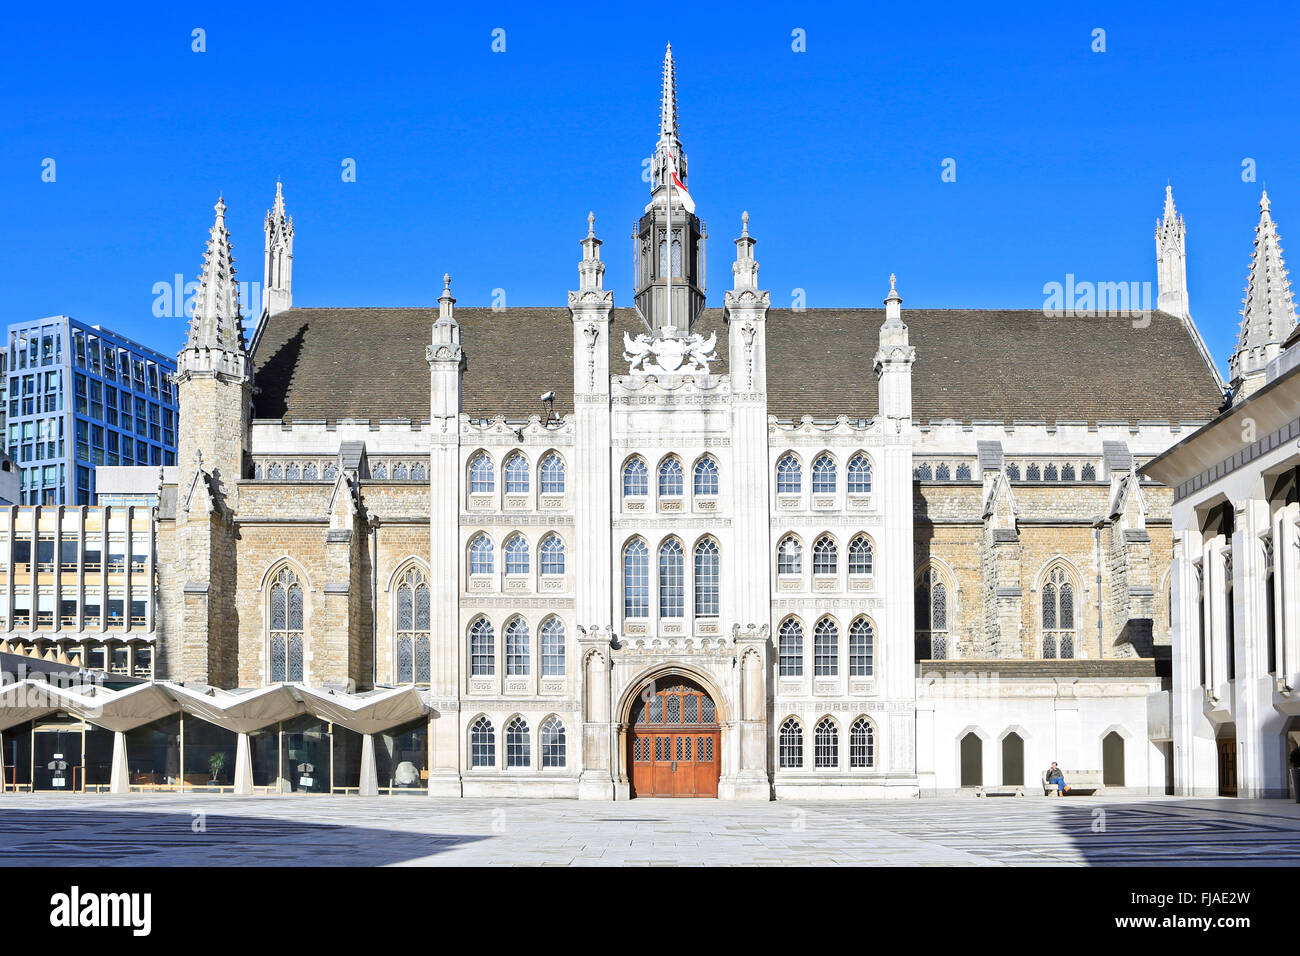 The medieval Guildhall building - seat of municipal government in the City of London, showing the 18th facade by George Dance Stock Photo